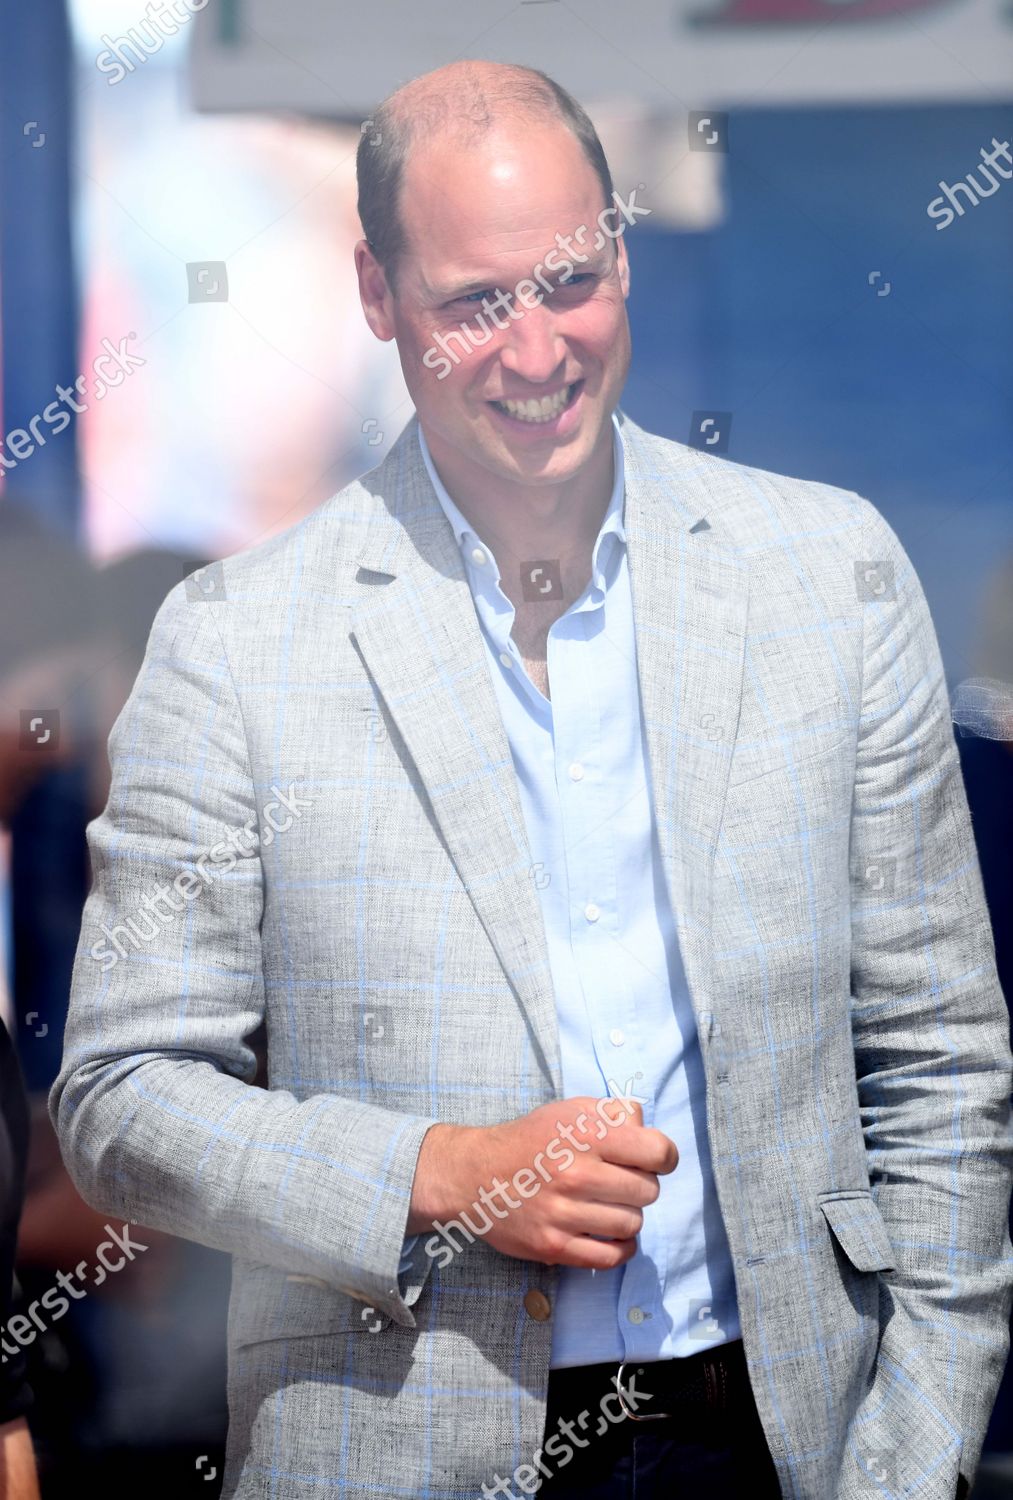 prince-william-and-catherine-duchess-of-cambridge-visit-to-barry-island-wales-uk-shutterstock-editorial-10733869aj.jpg